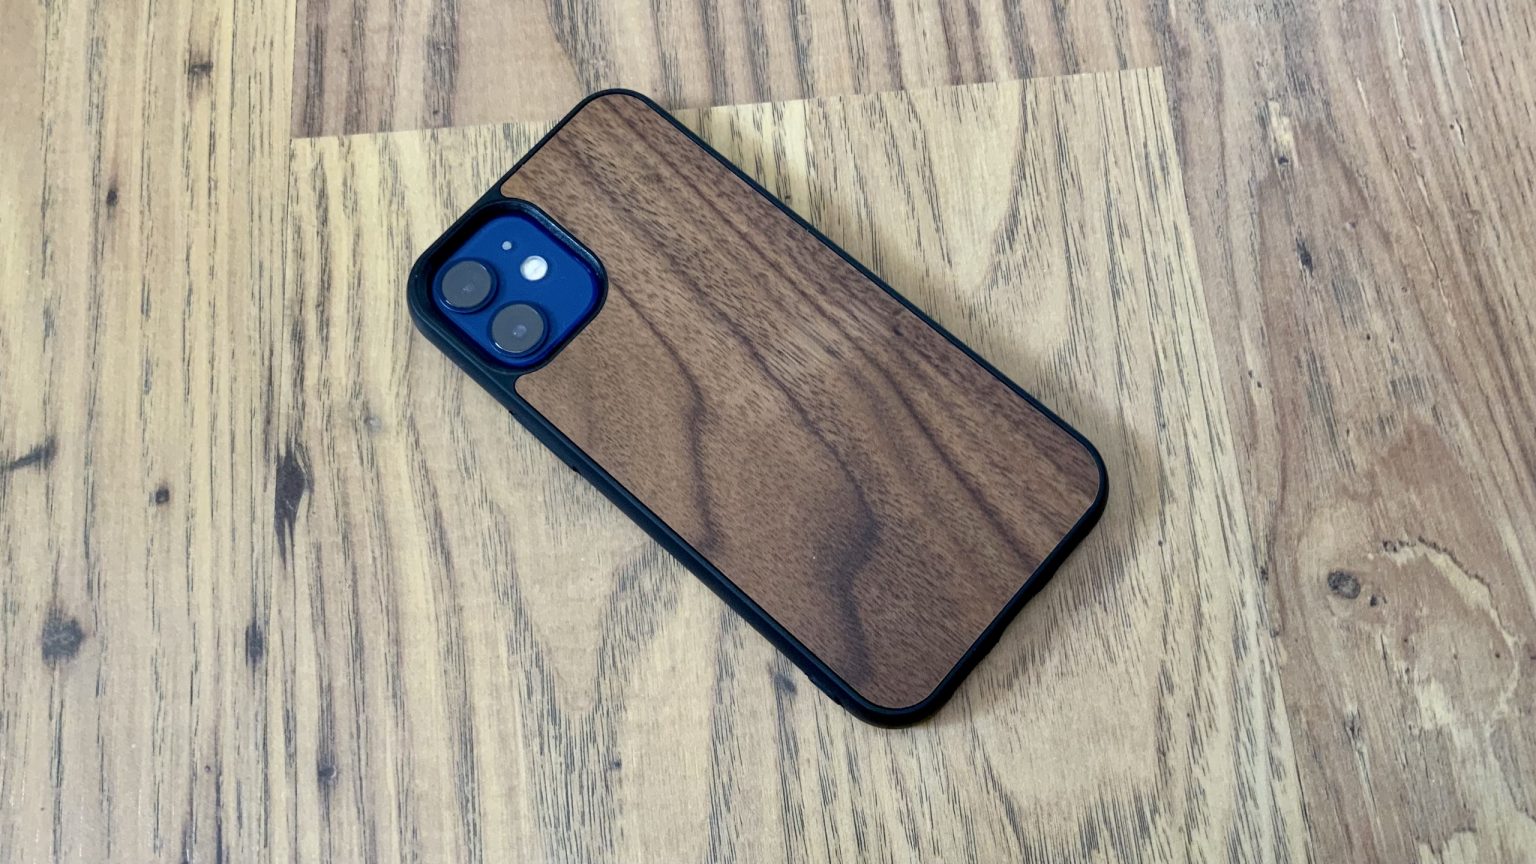 Wooden Bumper for iPhone 12 review